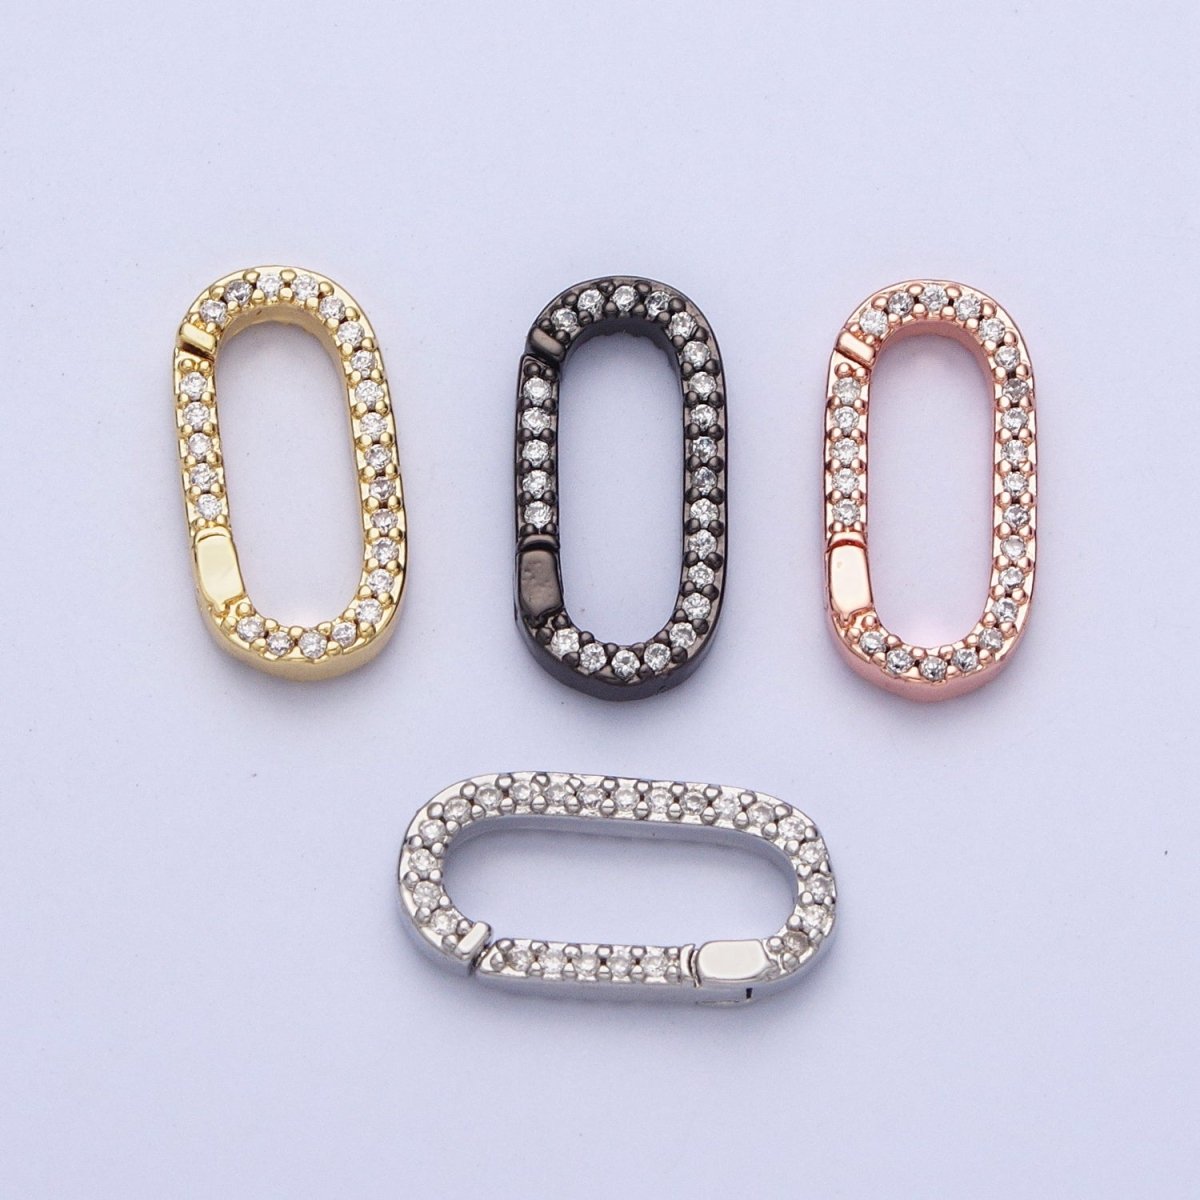 Gold Filled Micro Pace CZ Long Oval Spring Gate Clasps For DIY Jewelry Making in Gold, Silver, Rose Gold, Black L-858 L-859 L-860 L-861 - DLUXCA